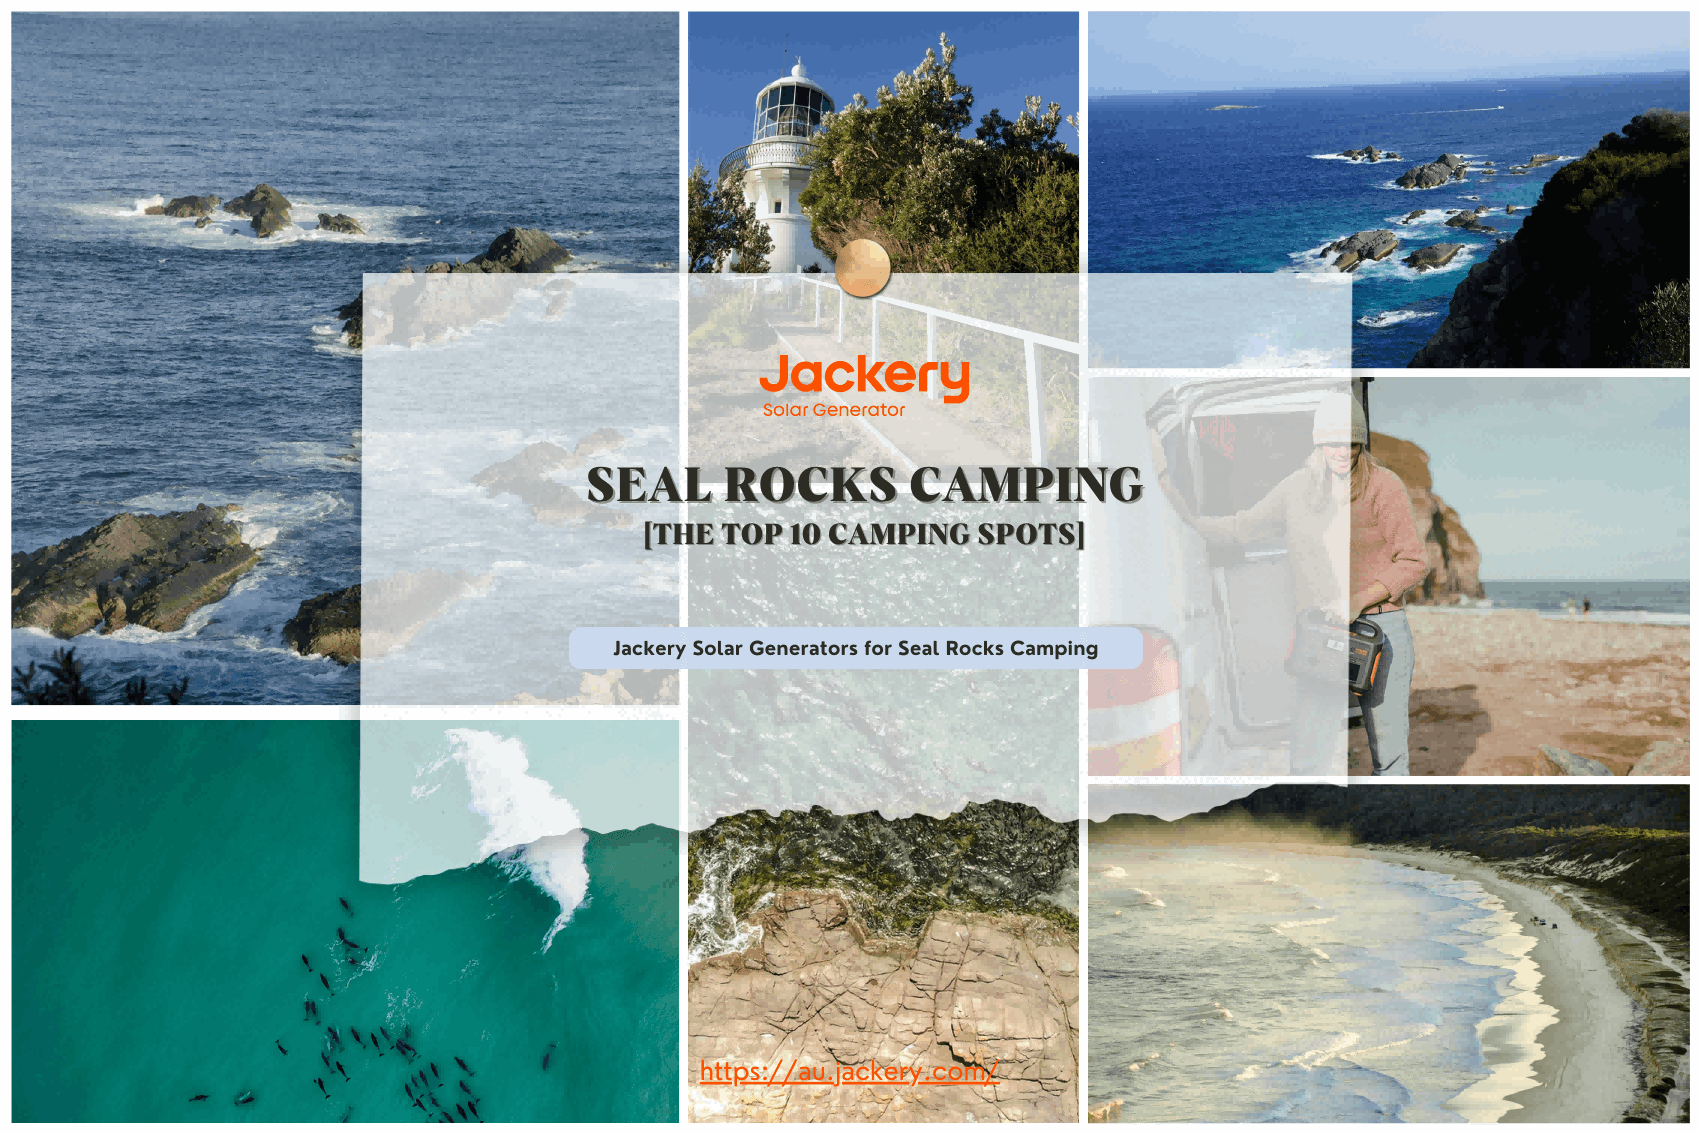 Best Seal Rocks Camping: Top 10 Camping Spots